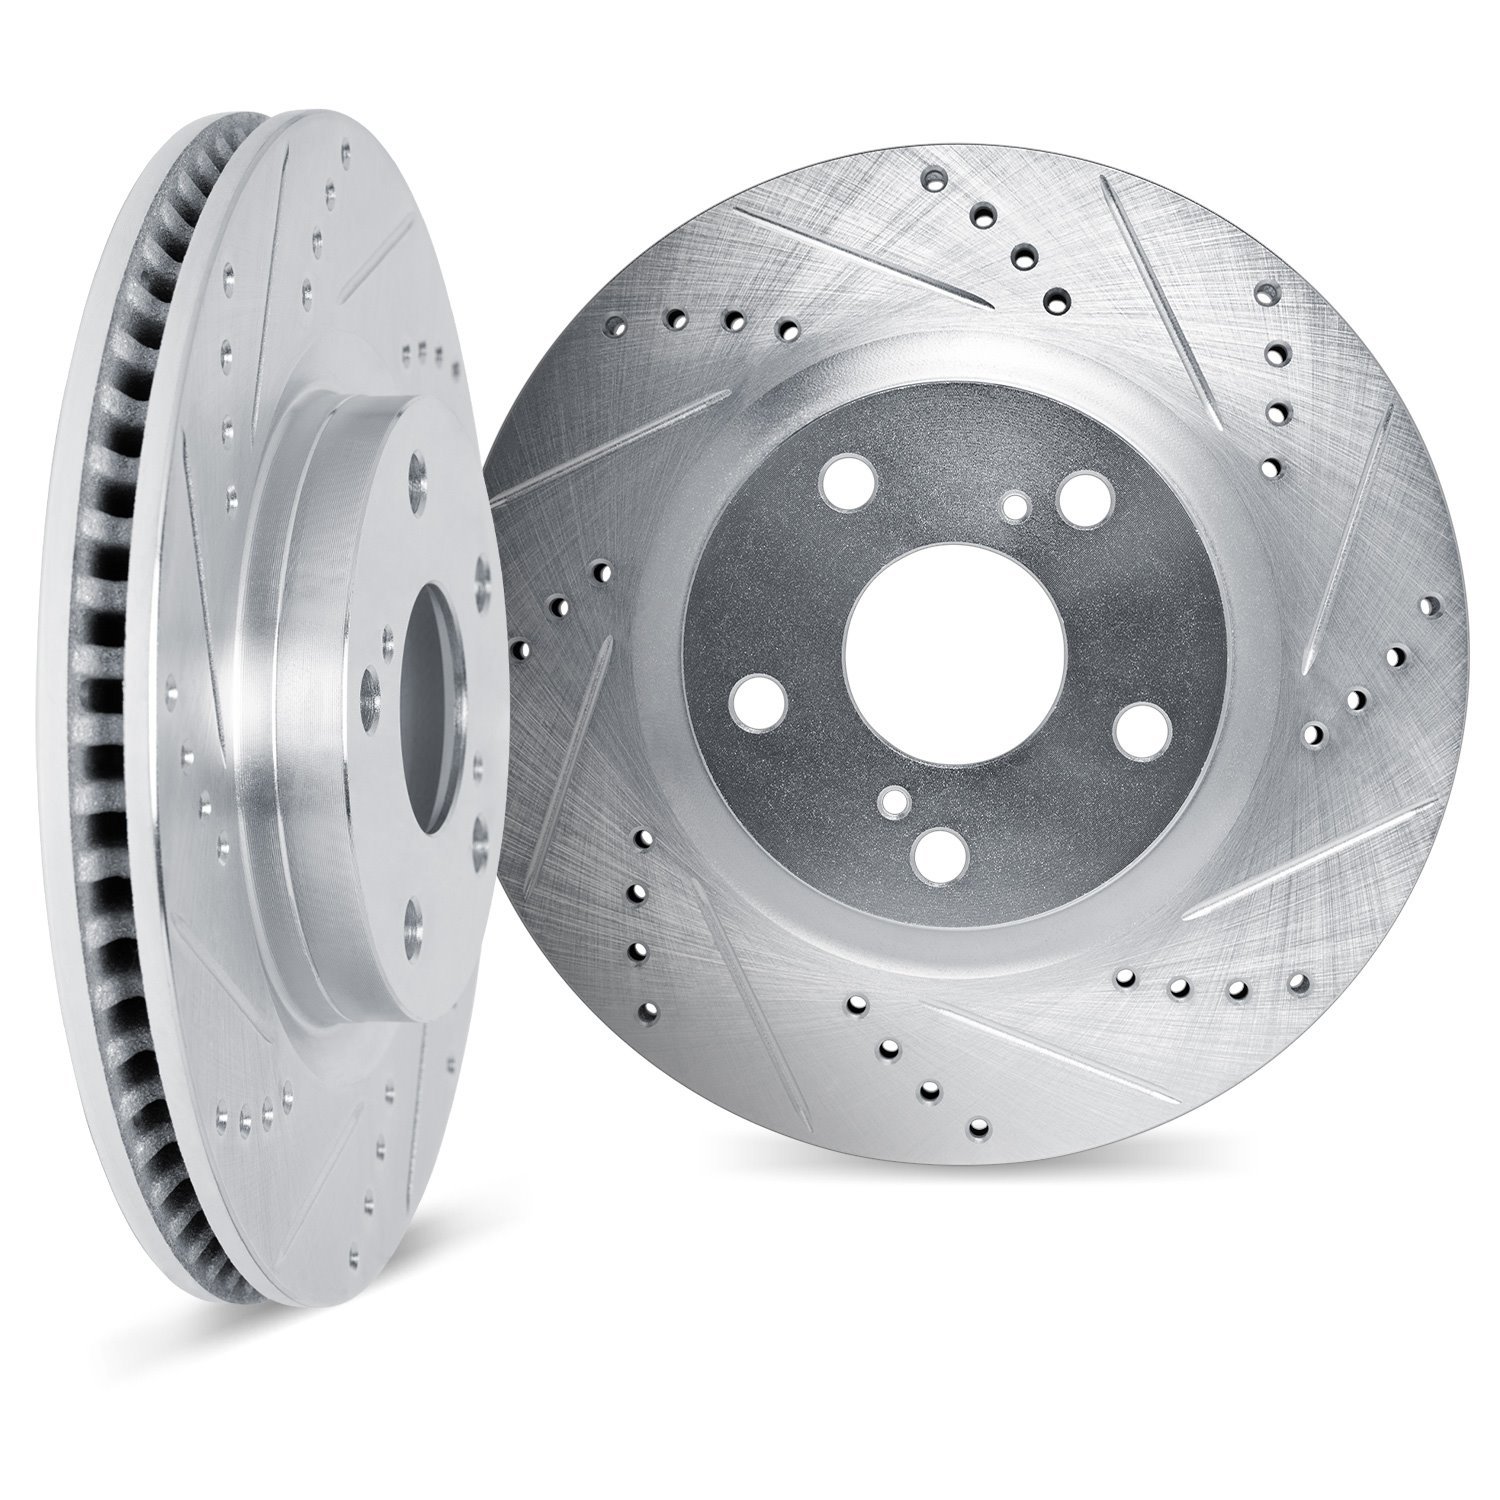 7002-67109 Drilled/Slotted Brake Rotors [Silver], Fits Select Infiniti/Nissan, Position: Front